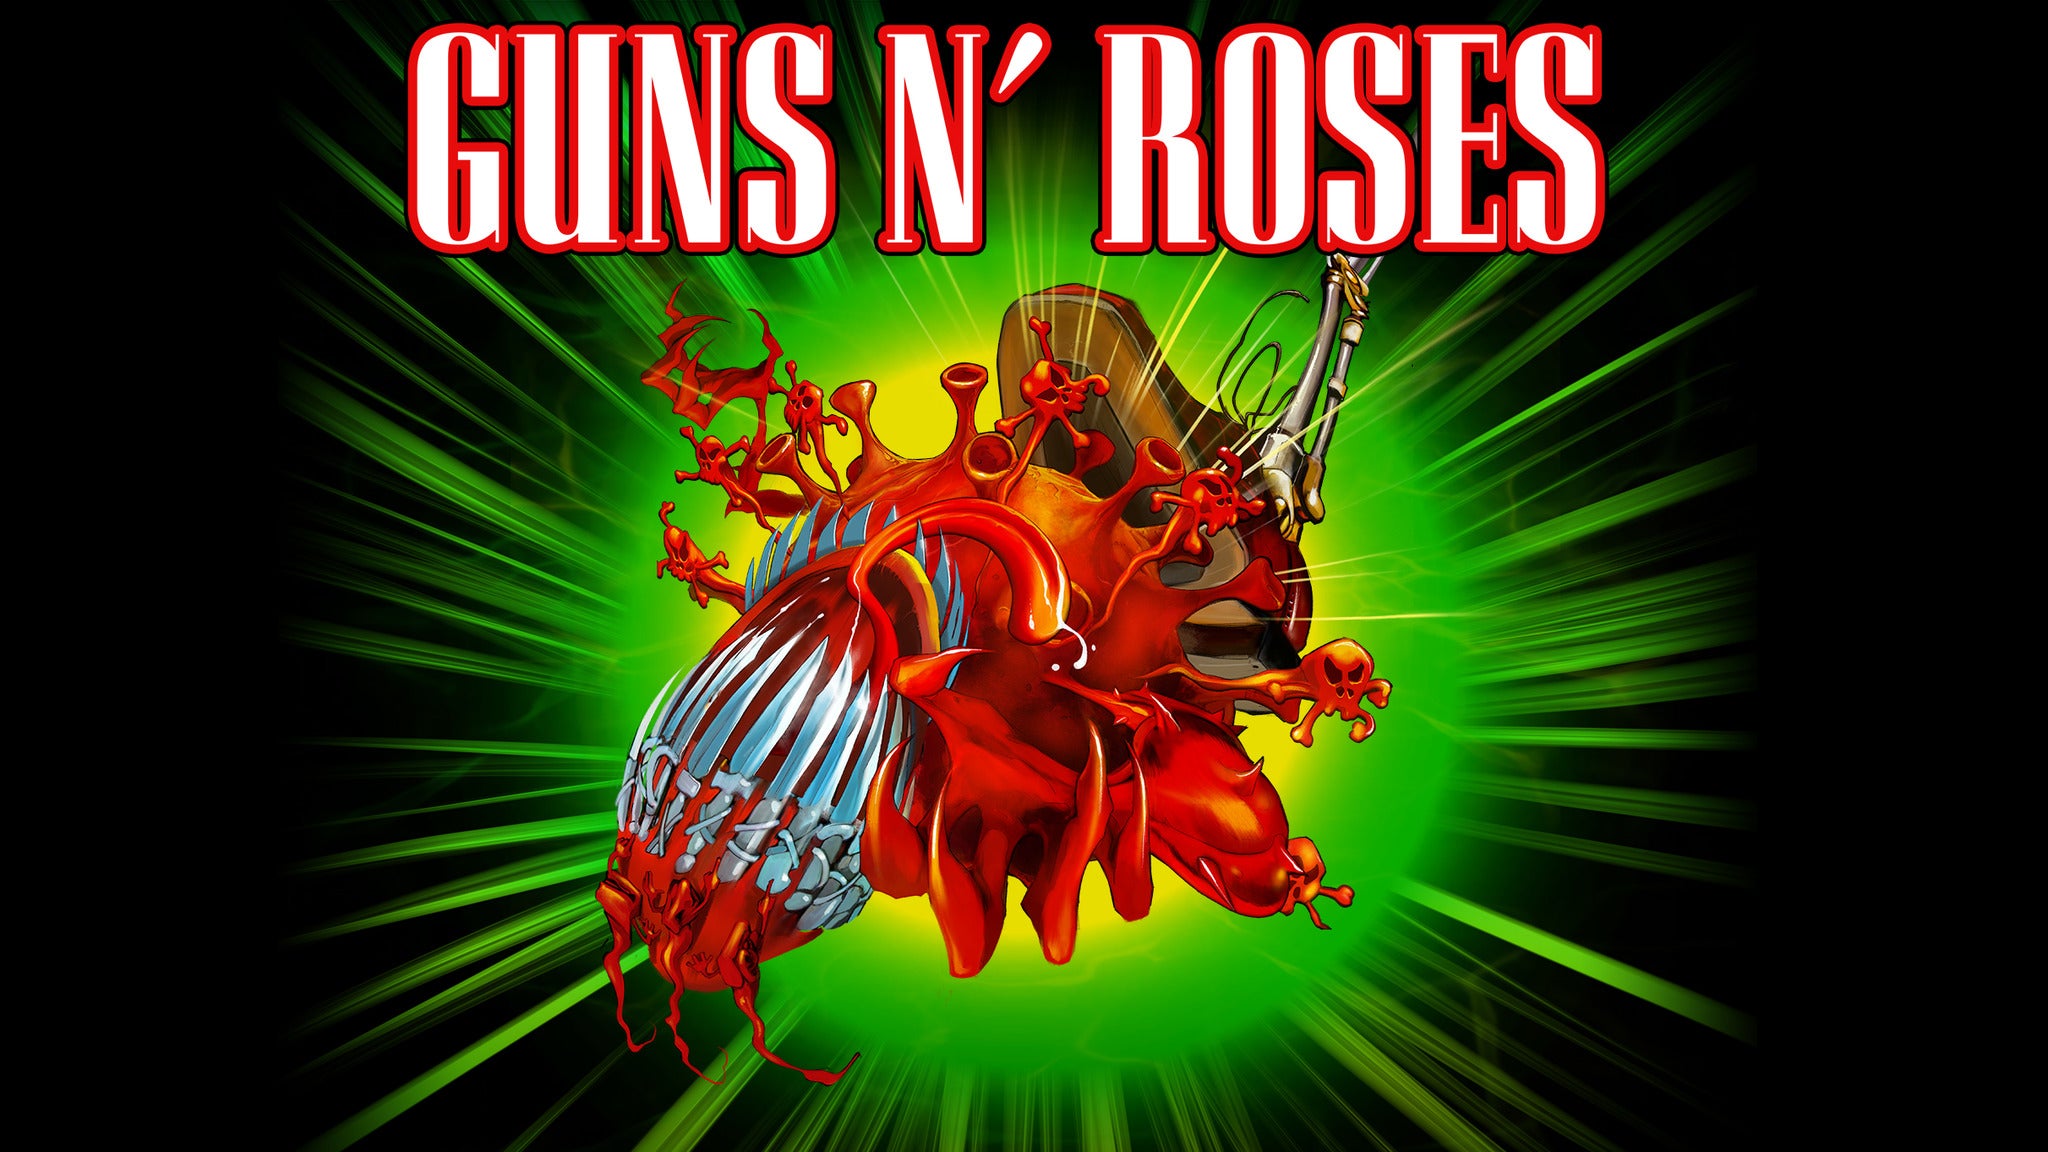 Guns N' Roses 2021 Tour presale password for show tickets in Phoenix, AZ (Phoenix Suns Arena (formerly Talking Stick Resort Arena))